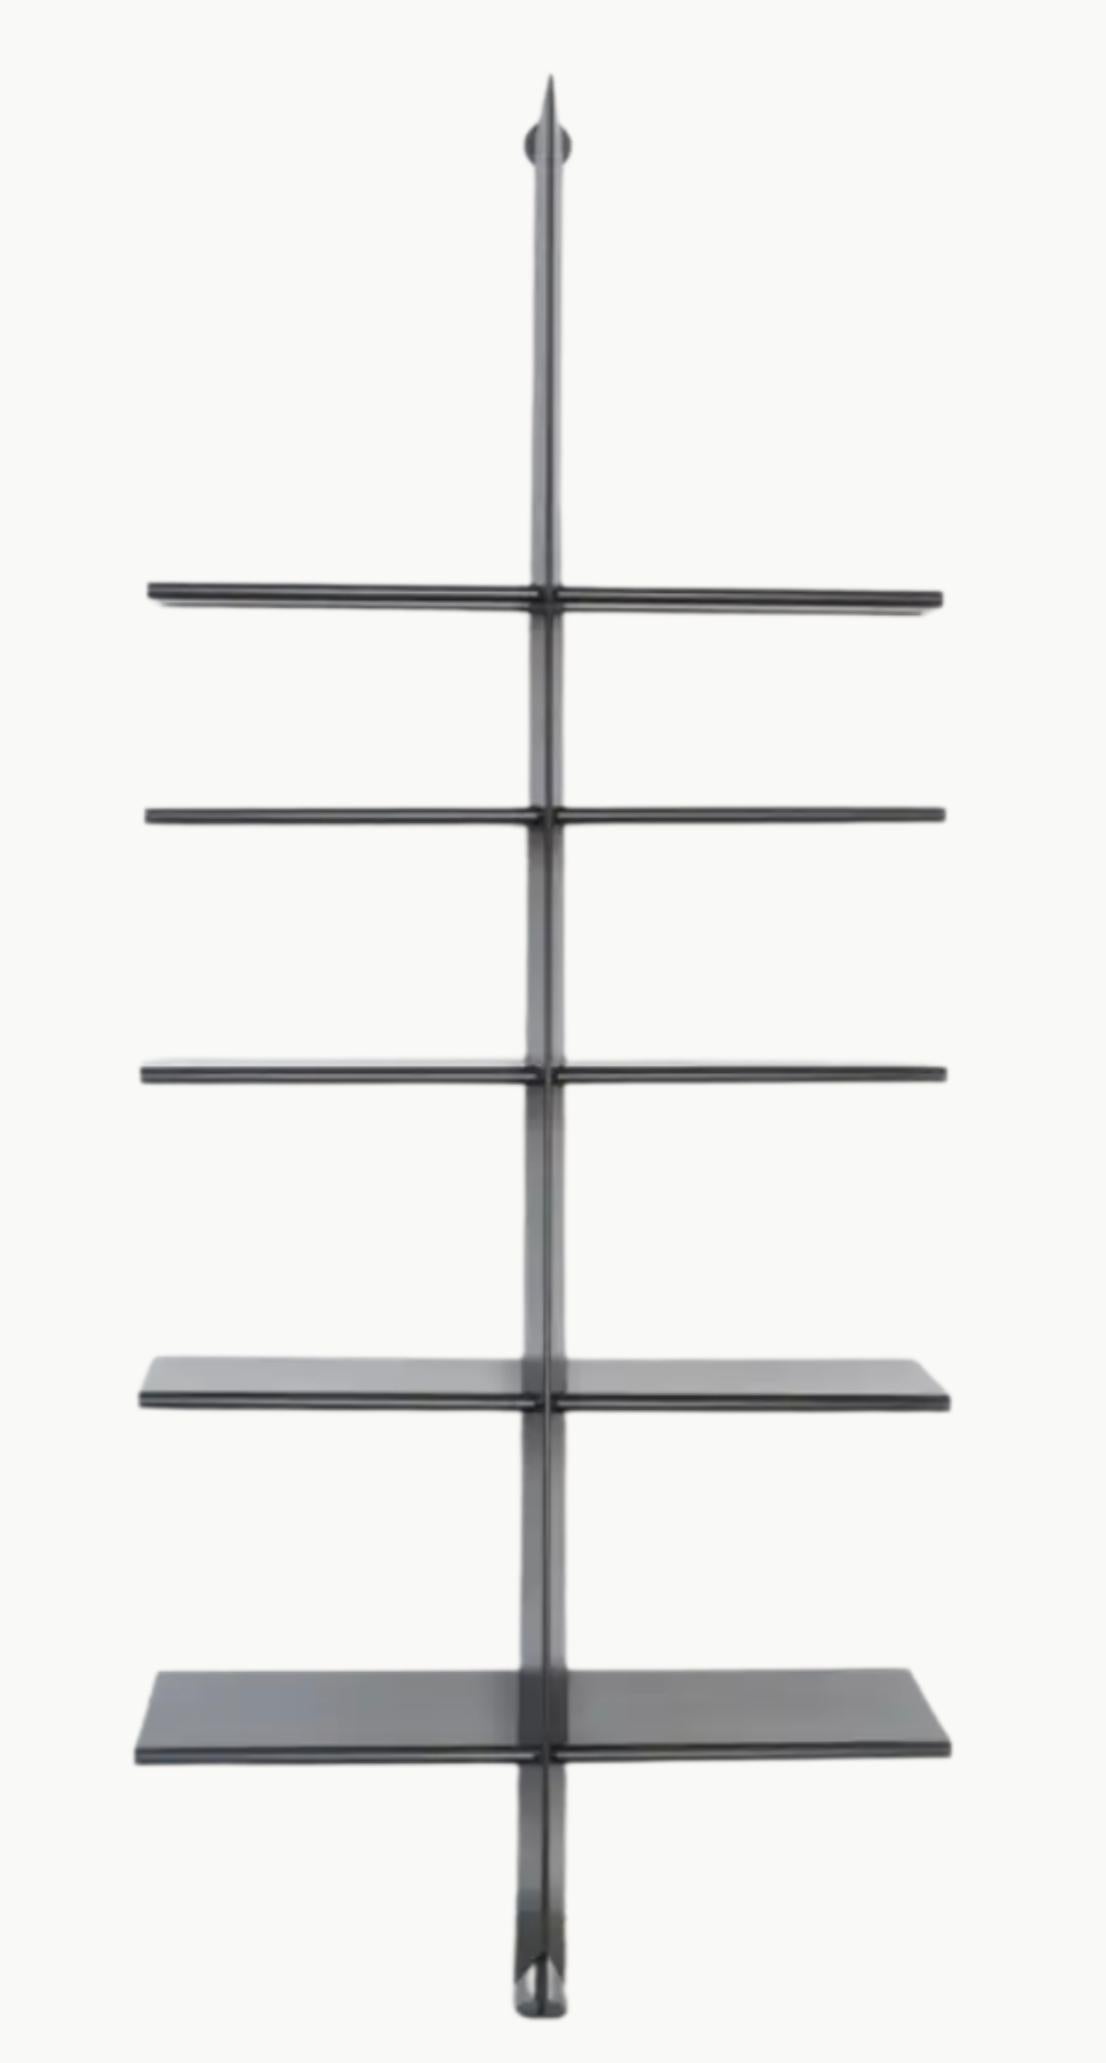 Mac Gee bookshelf by Philippe Starck for Baleri Italia, 1984. Powder-coated metal, one part form with angular adjusting wall and floor joints. The aerodynamic linear design is reminiscent of an art deco ocean liner.